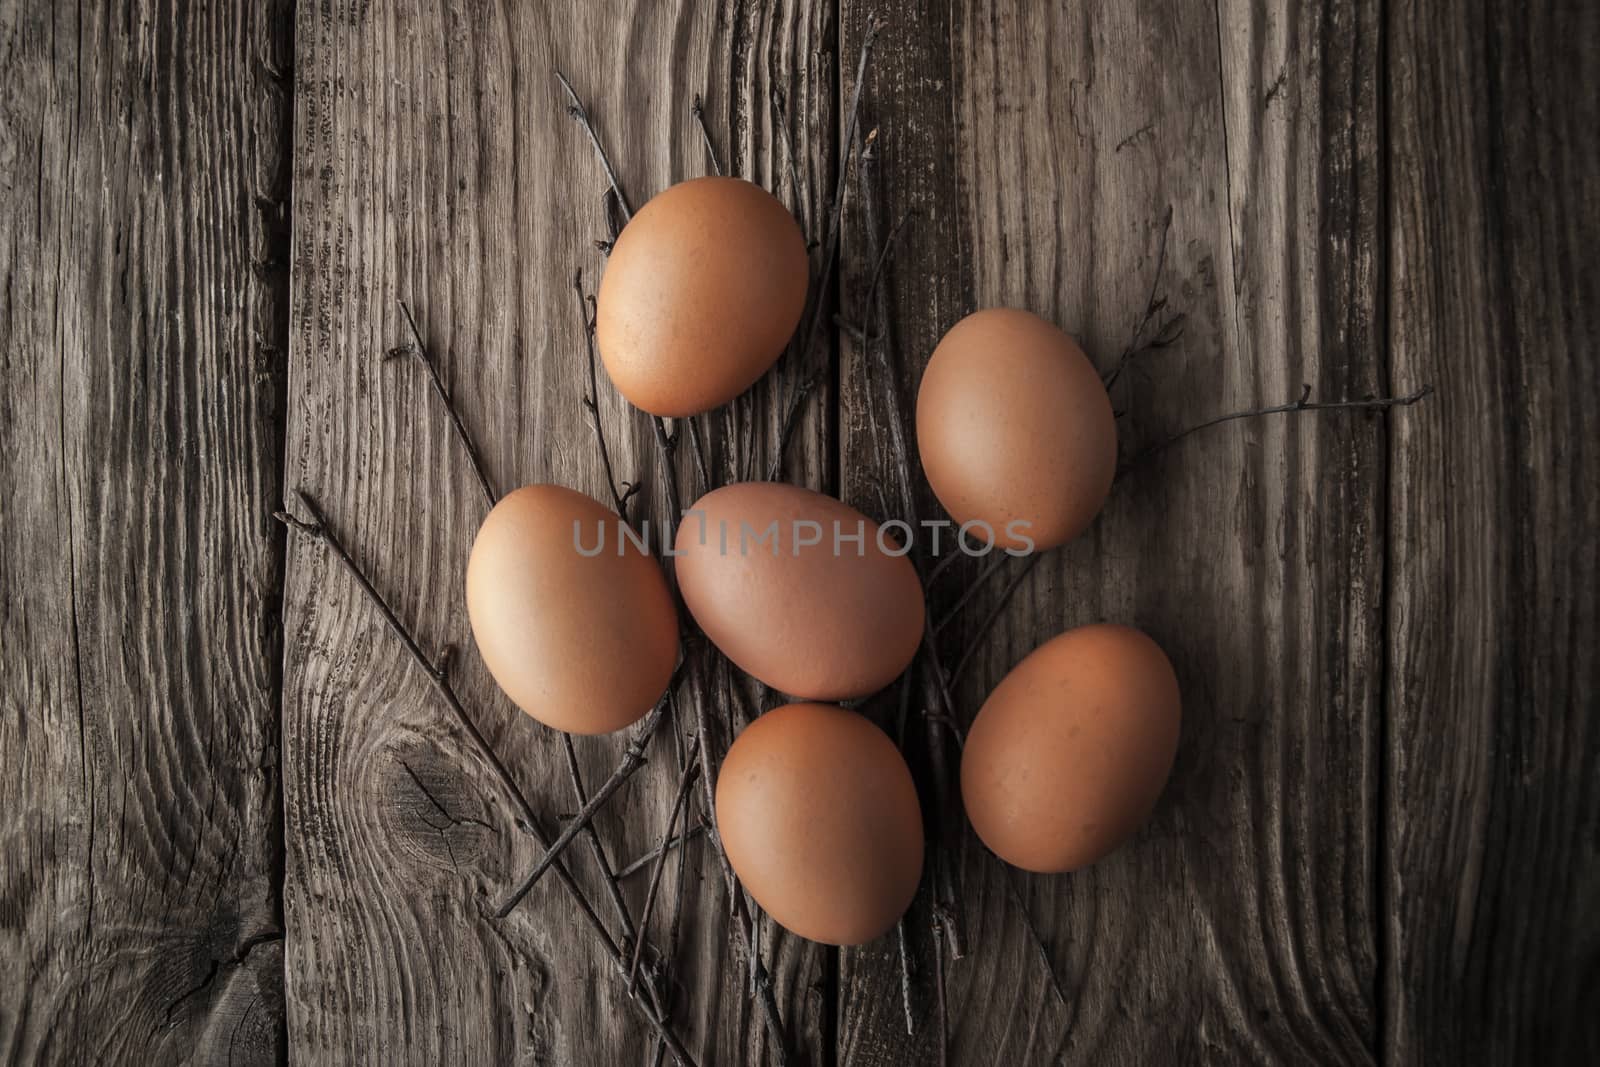 Chicken eggs on a wooden table horizontal